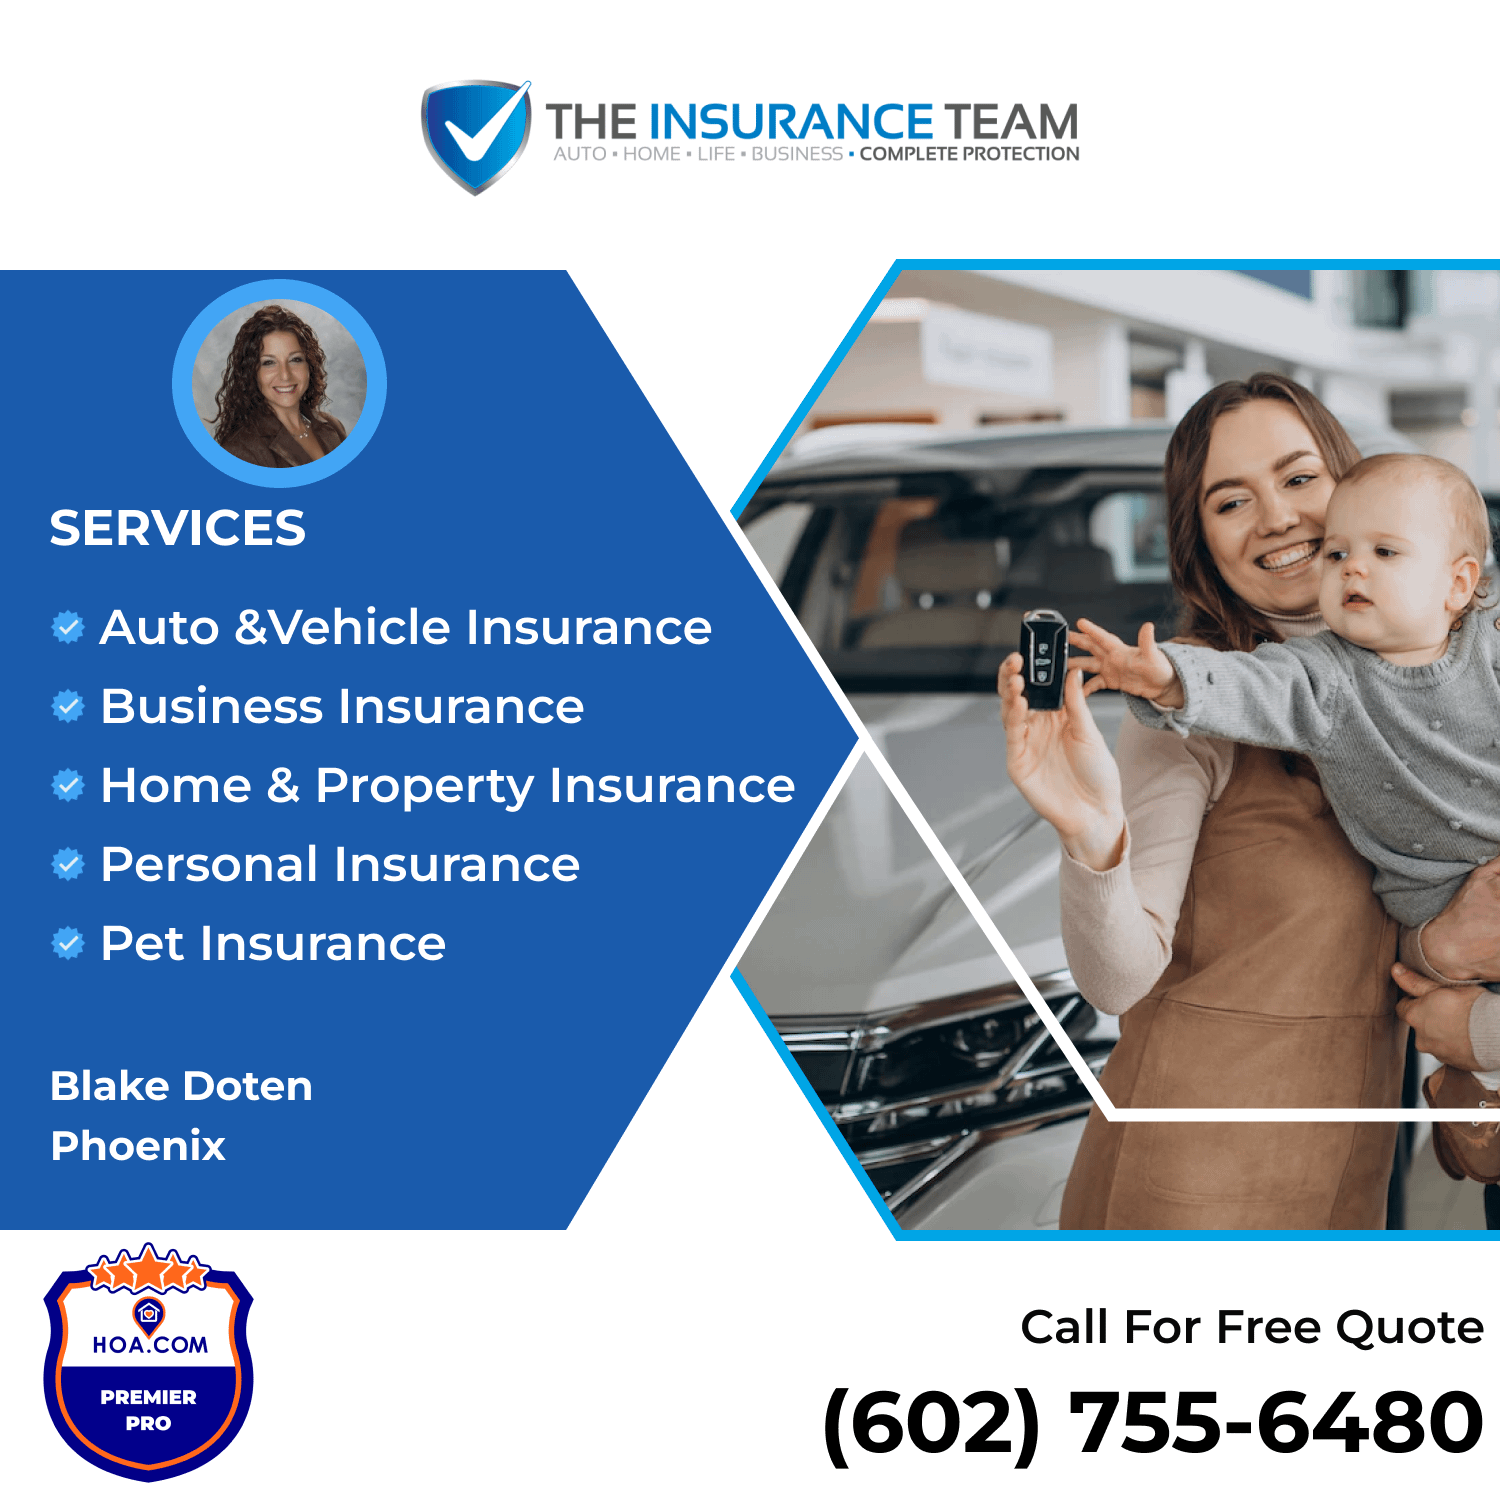 The Insurance Team Services